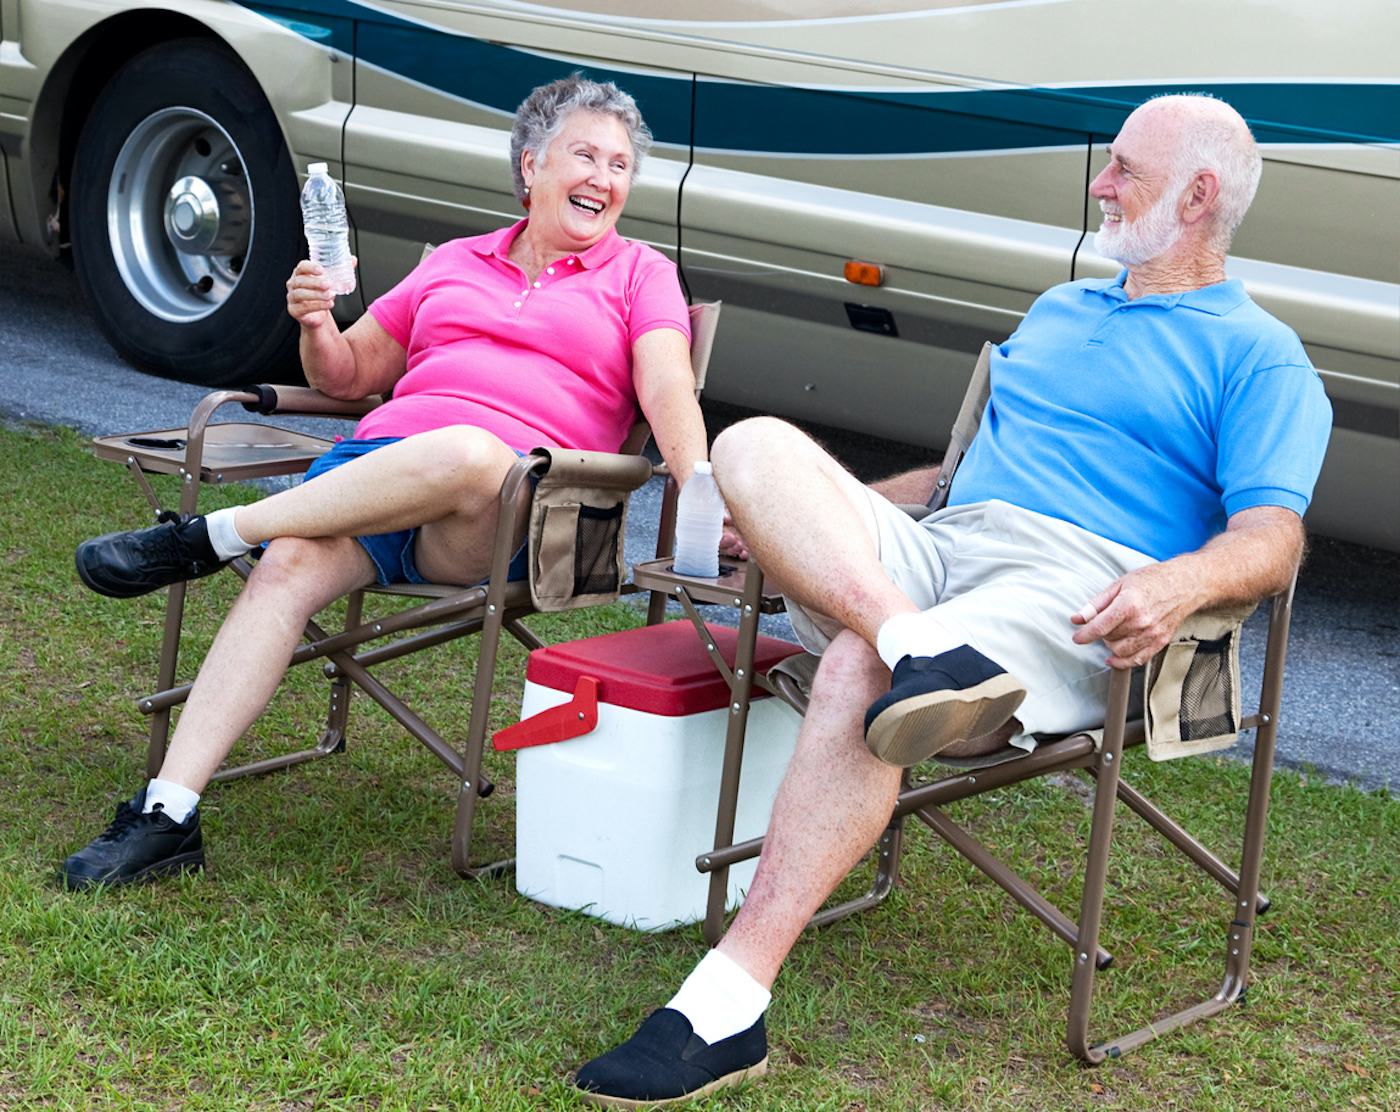 Senior campers sitting holding water bottles in folding chairs outside their motorhome.